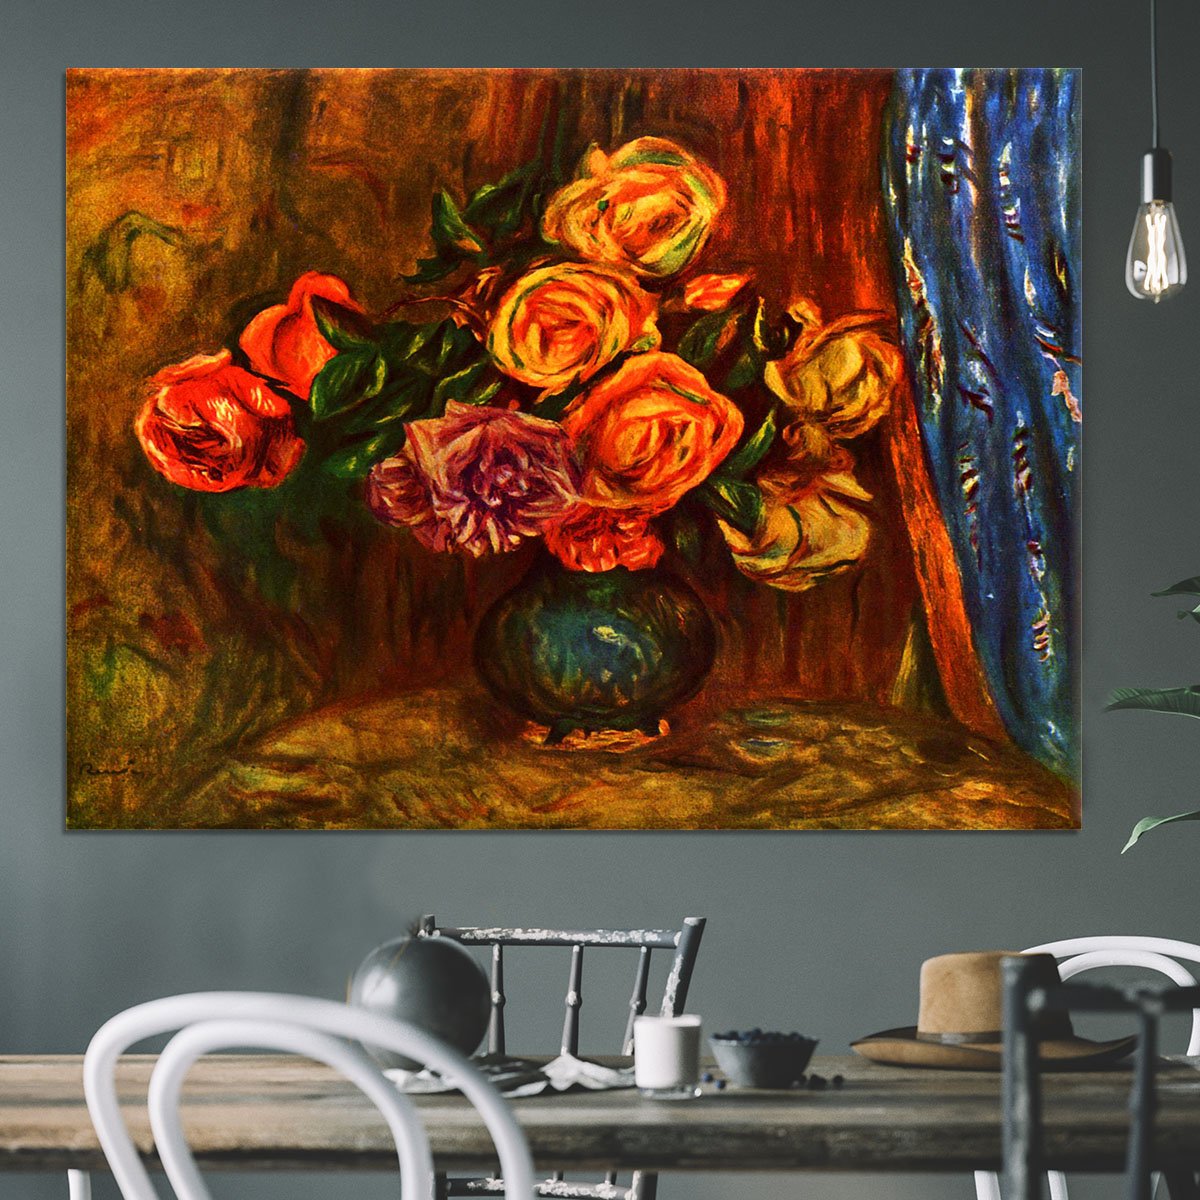 Still life roses before a blue curtain by Renoir Canvas Print or Poster